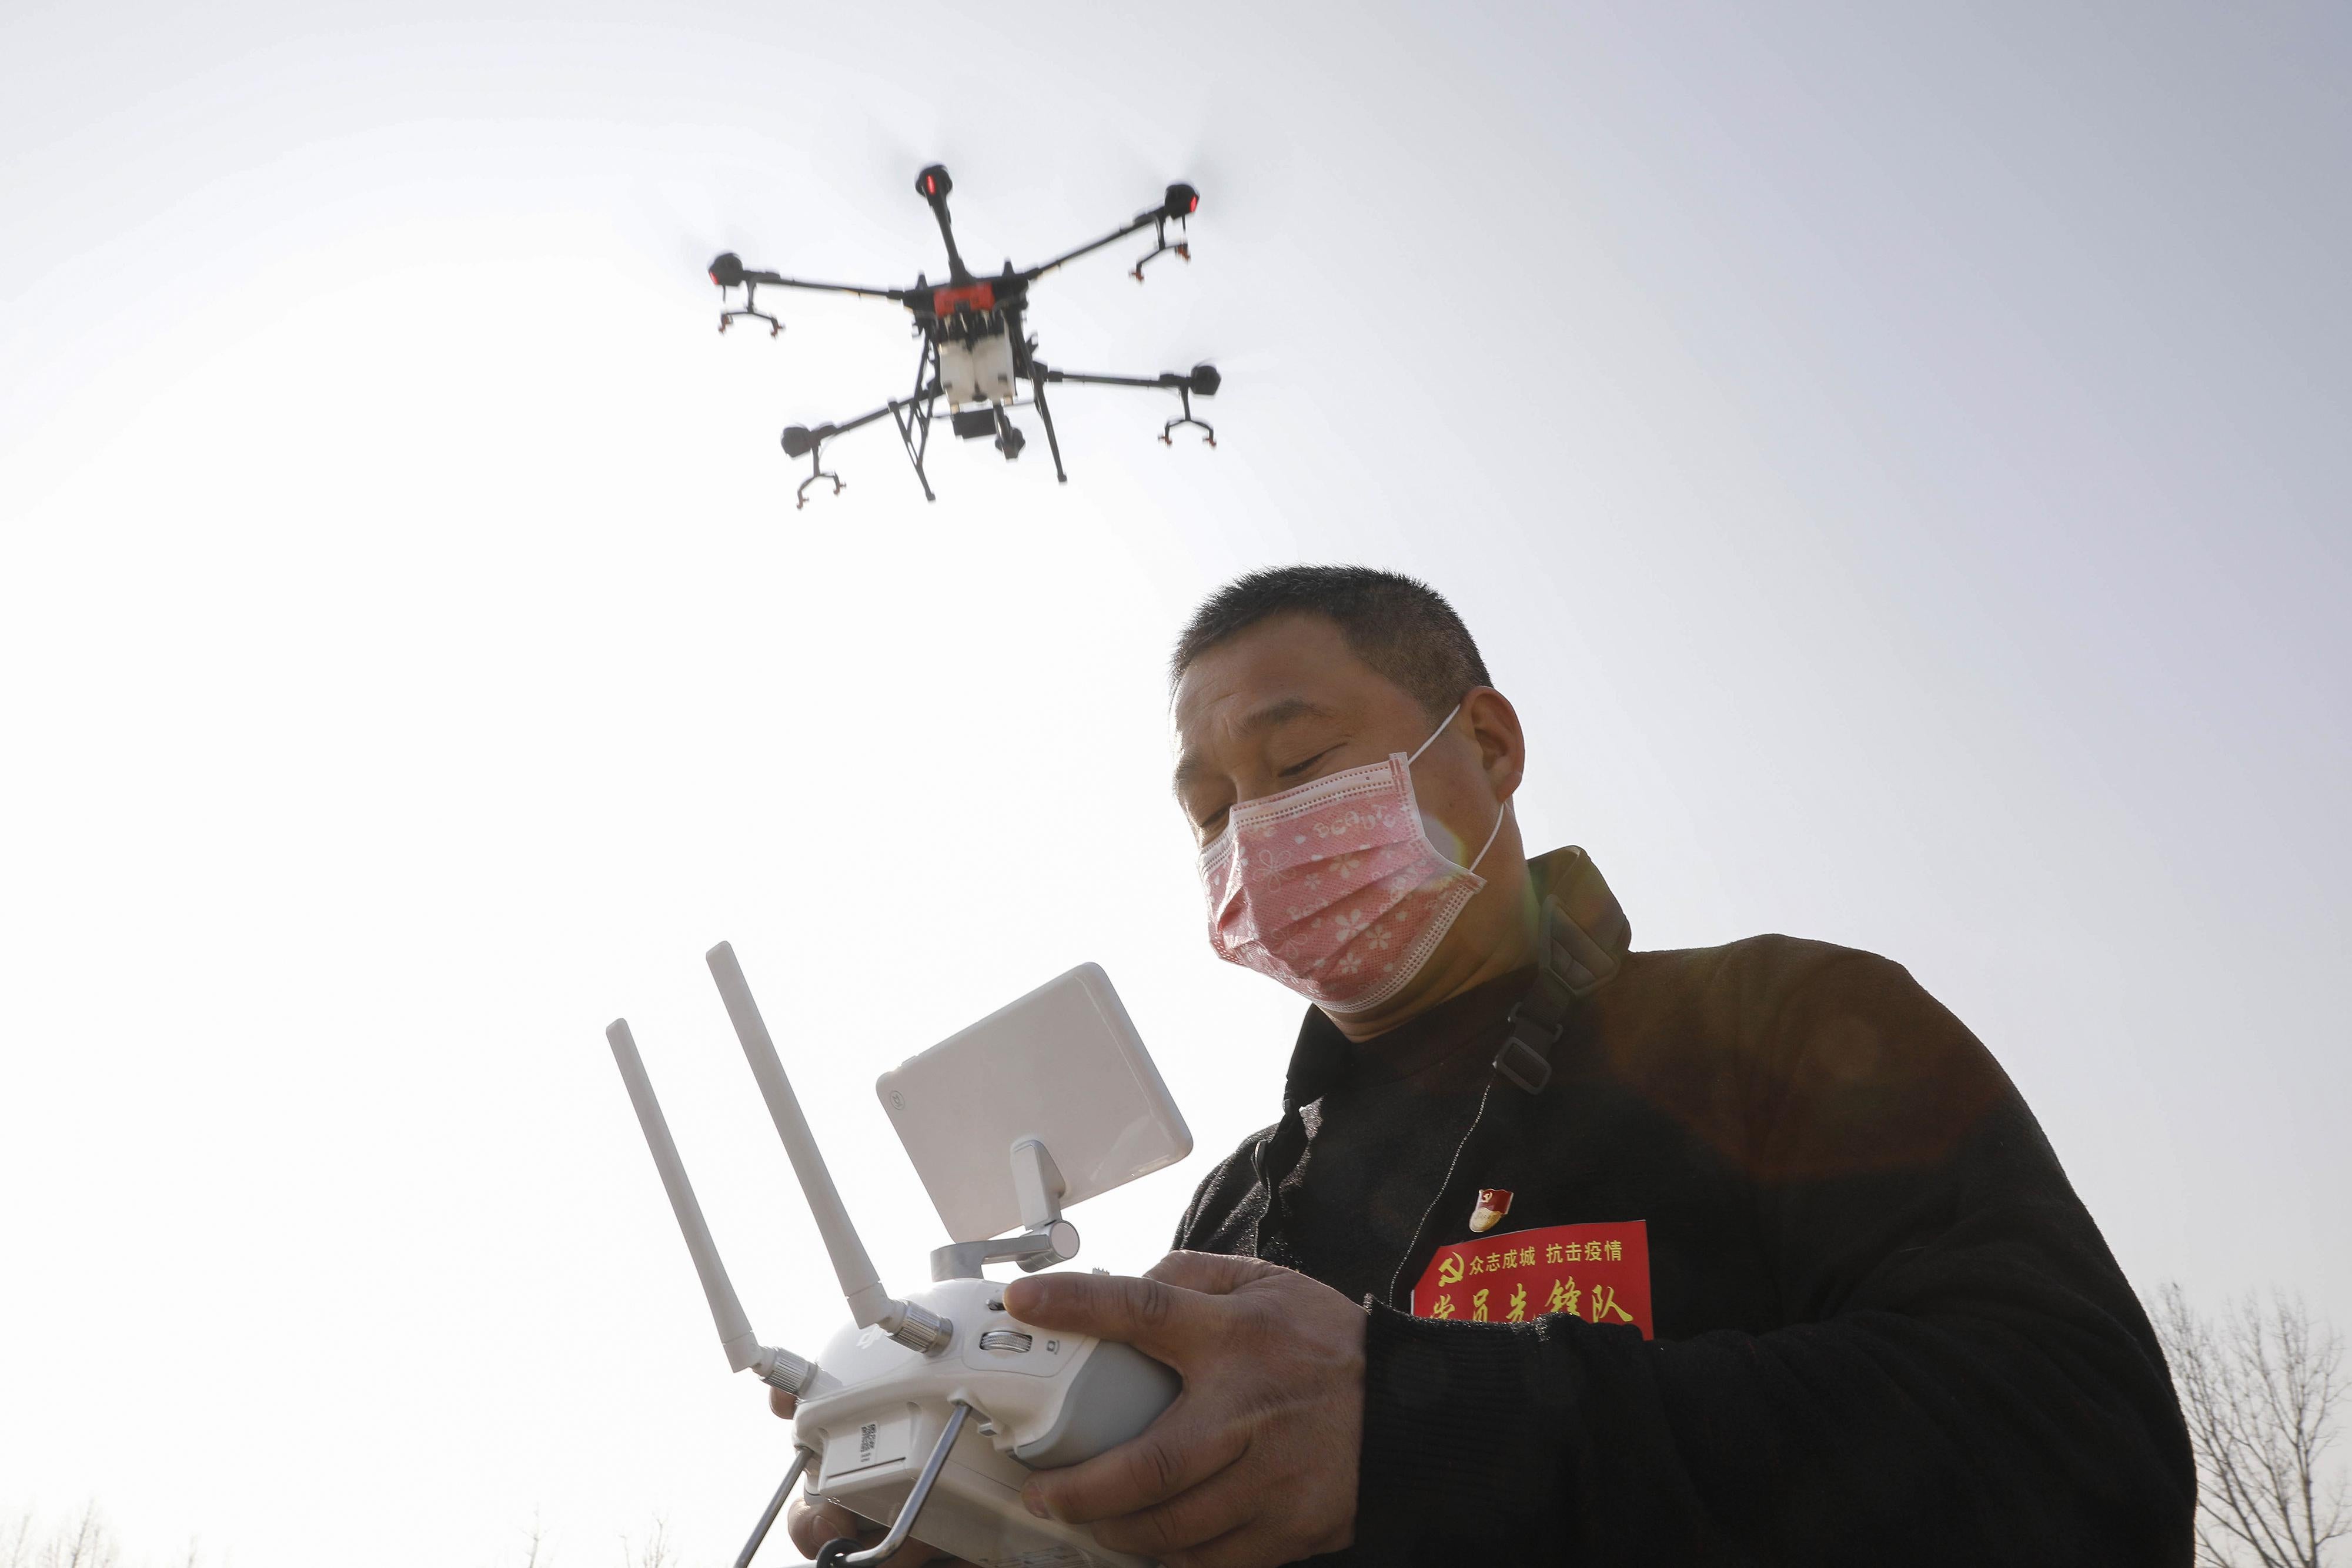 A man wearing a face mask operates a drone flying in the sky.